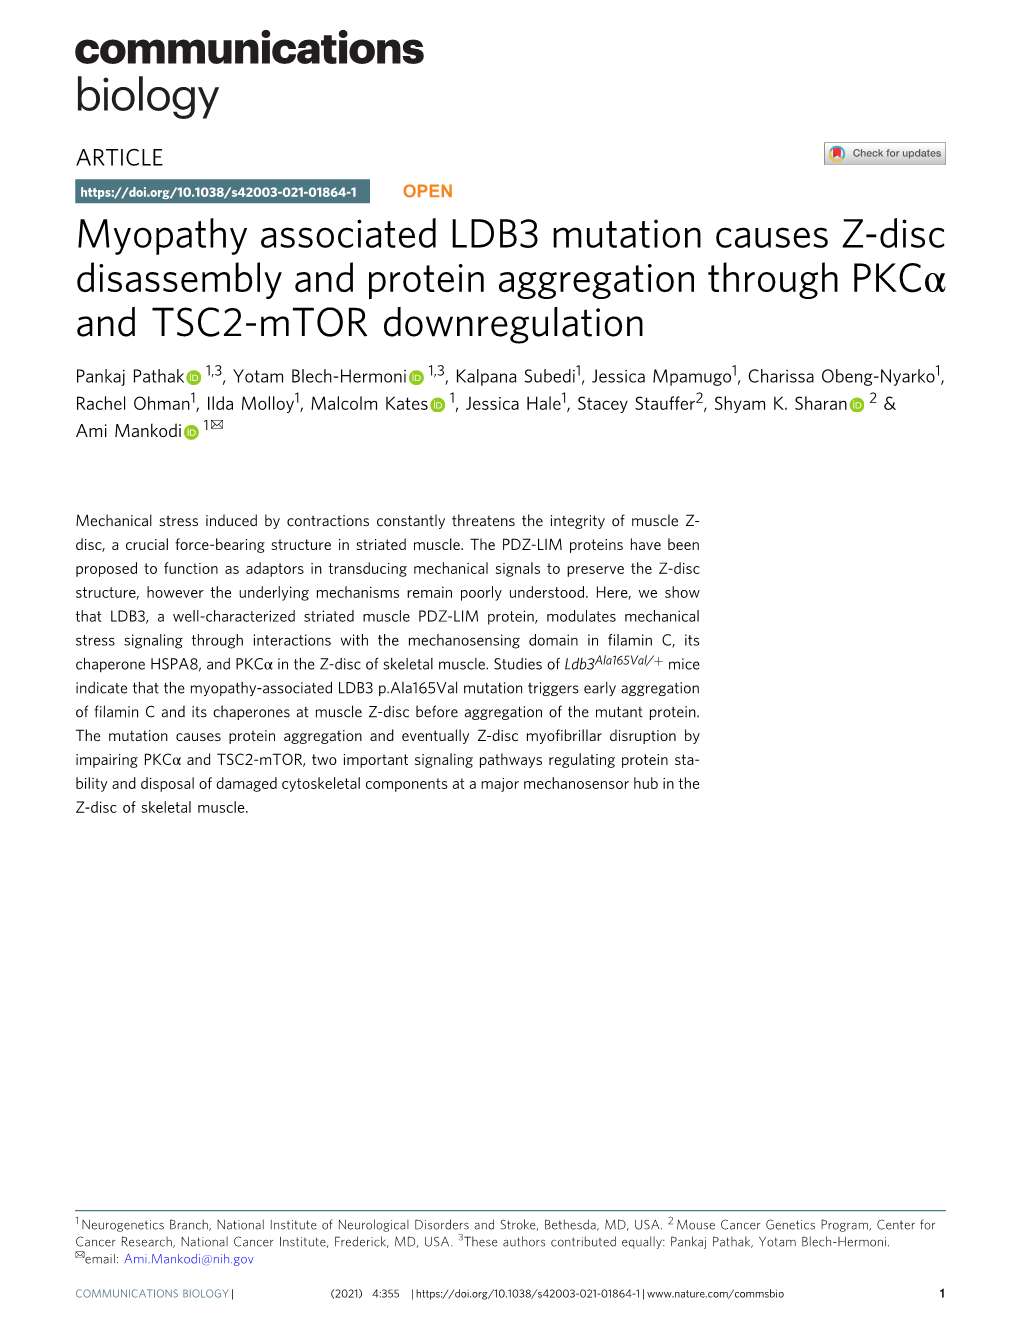 Myopathy Associated LDB3 Mutation Causes Z-Disc Disassembly and Protein Aggregation Through Pkcα and TSC2-Mtor Downregulation